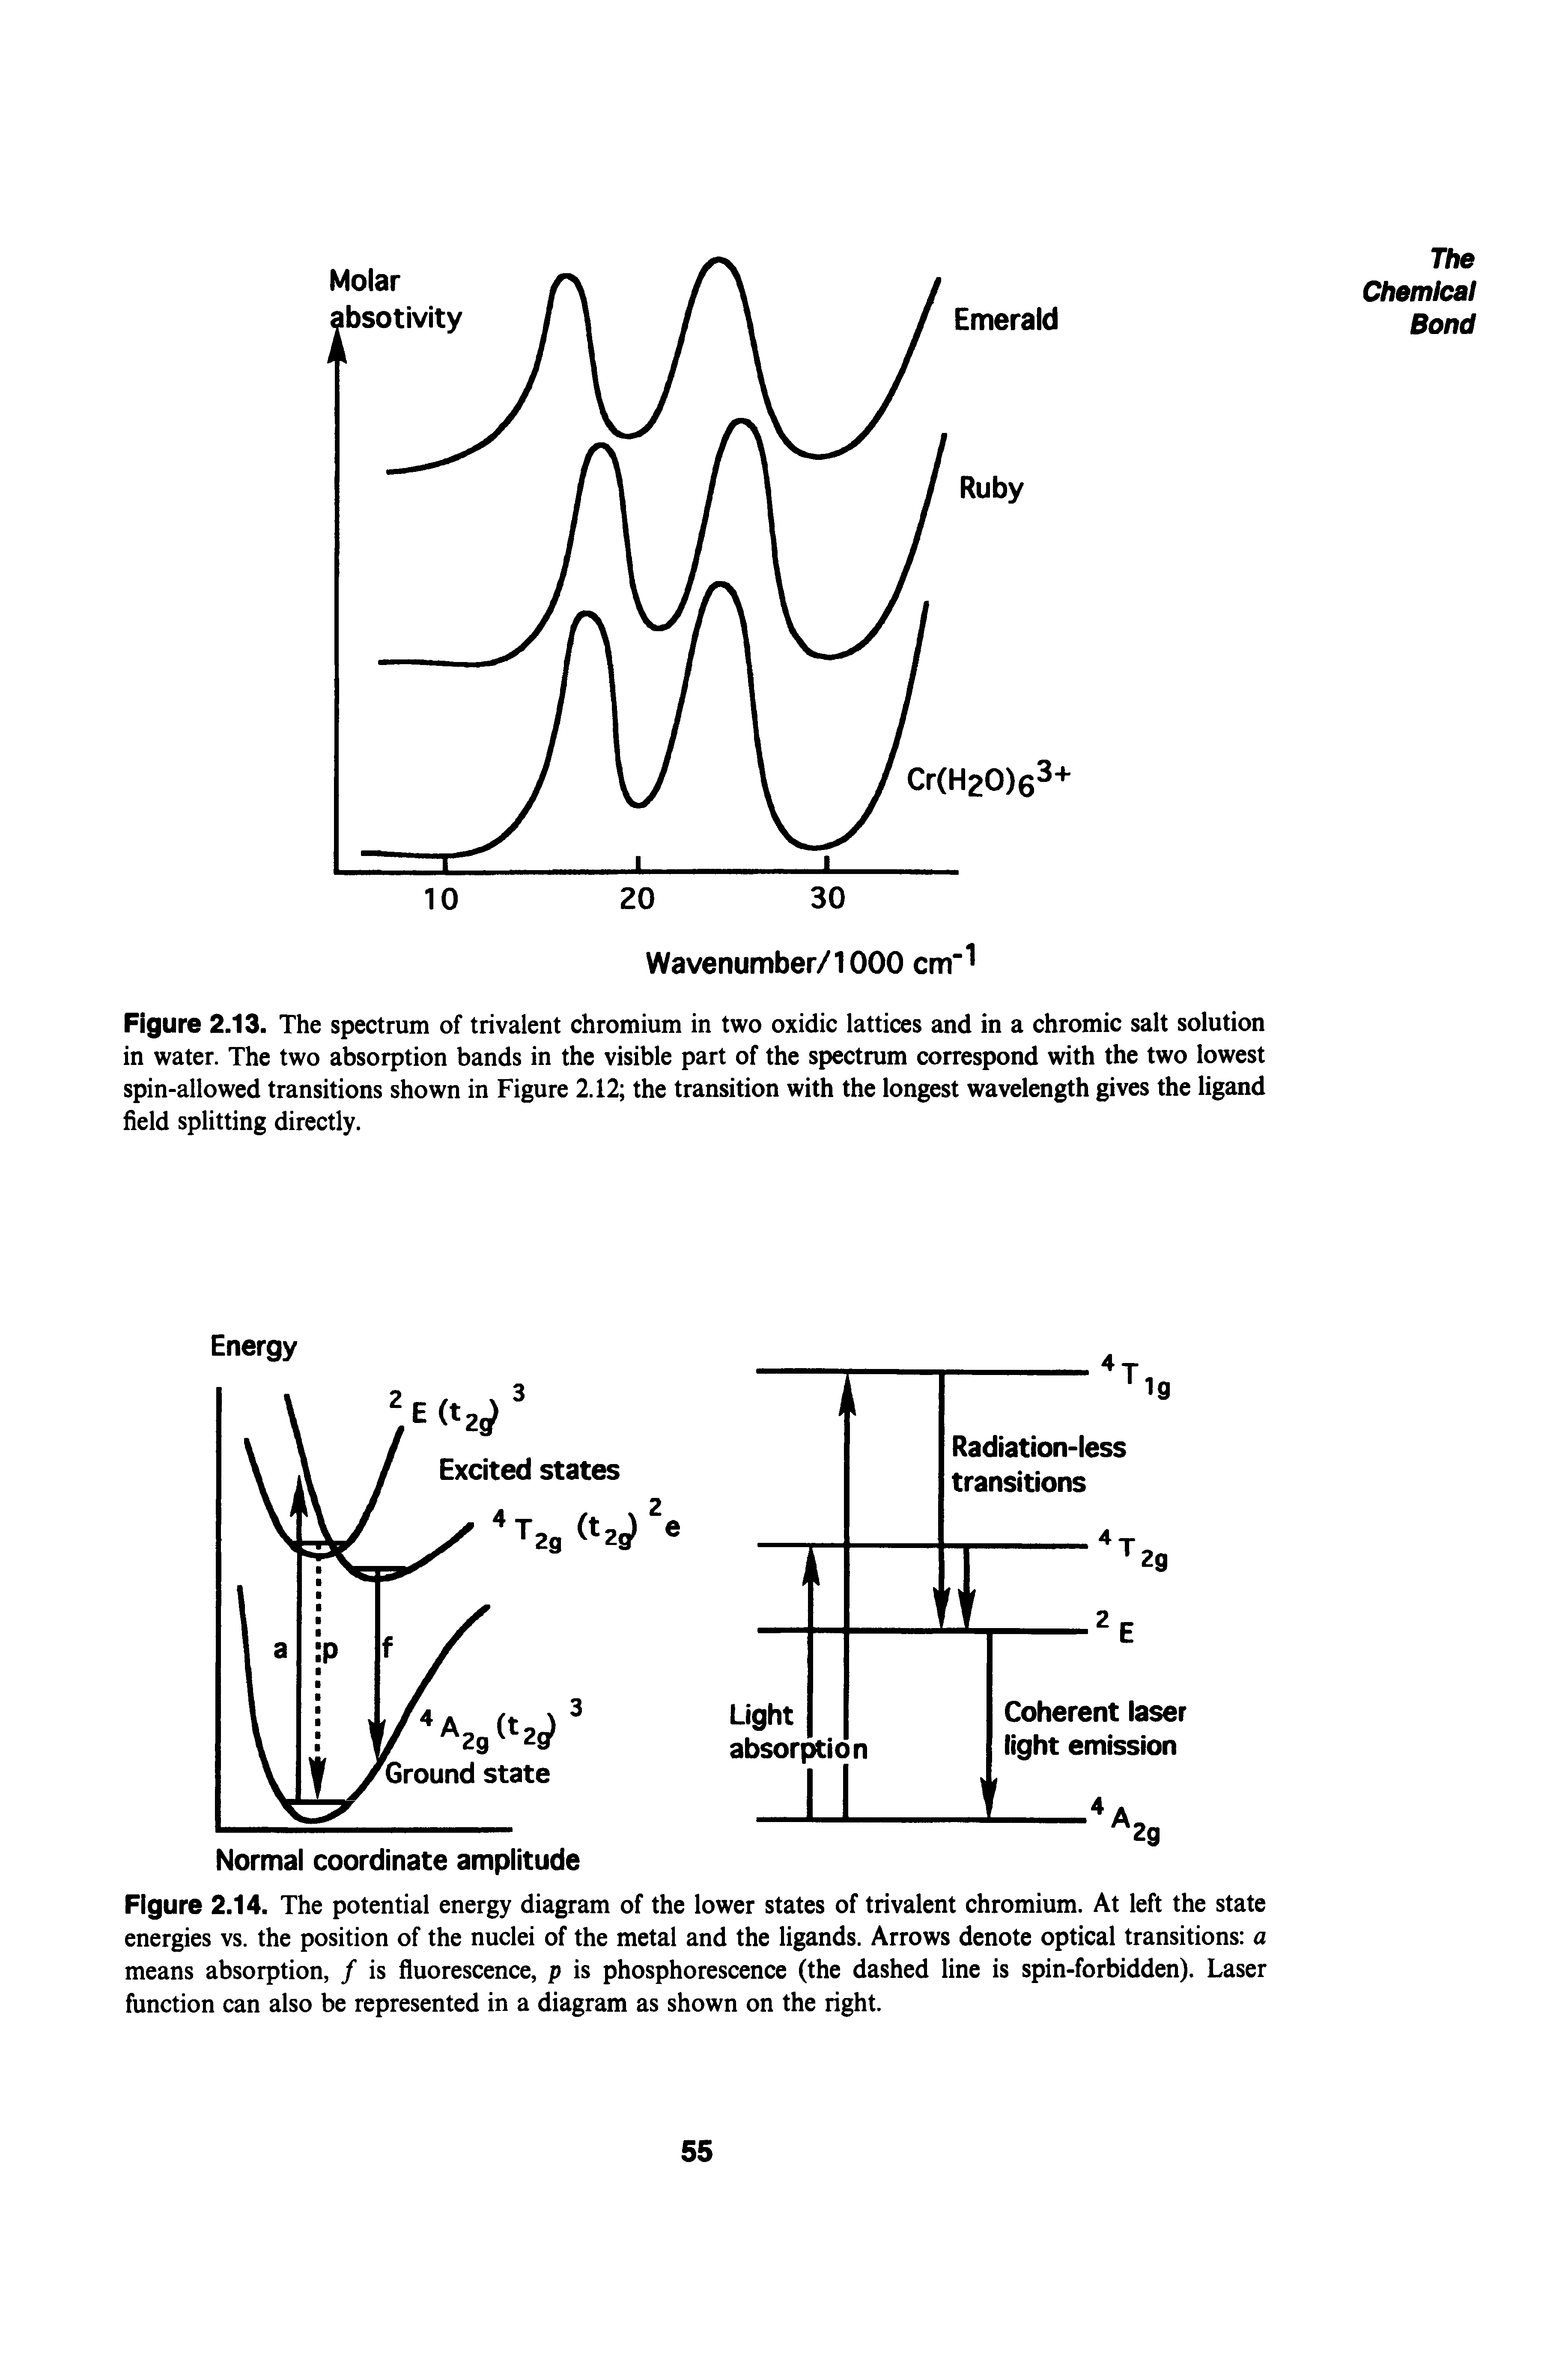 Figure 2.13. The spectrum of trivalent chromium in two oxidic lattices and in a chromic salt solution in water. The two absorption bands in the visible part of the spectrum correspond with the two lowest spin-allowed transitions shown in Figure 2.12 the transition with the longest wavelength gives the ligand field splitting directly.